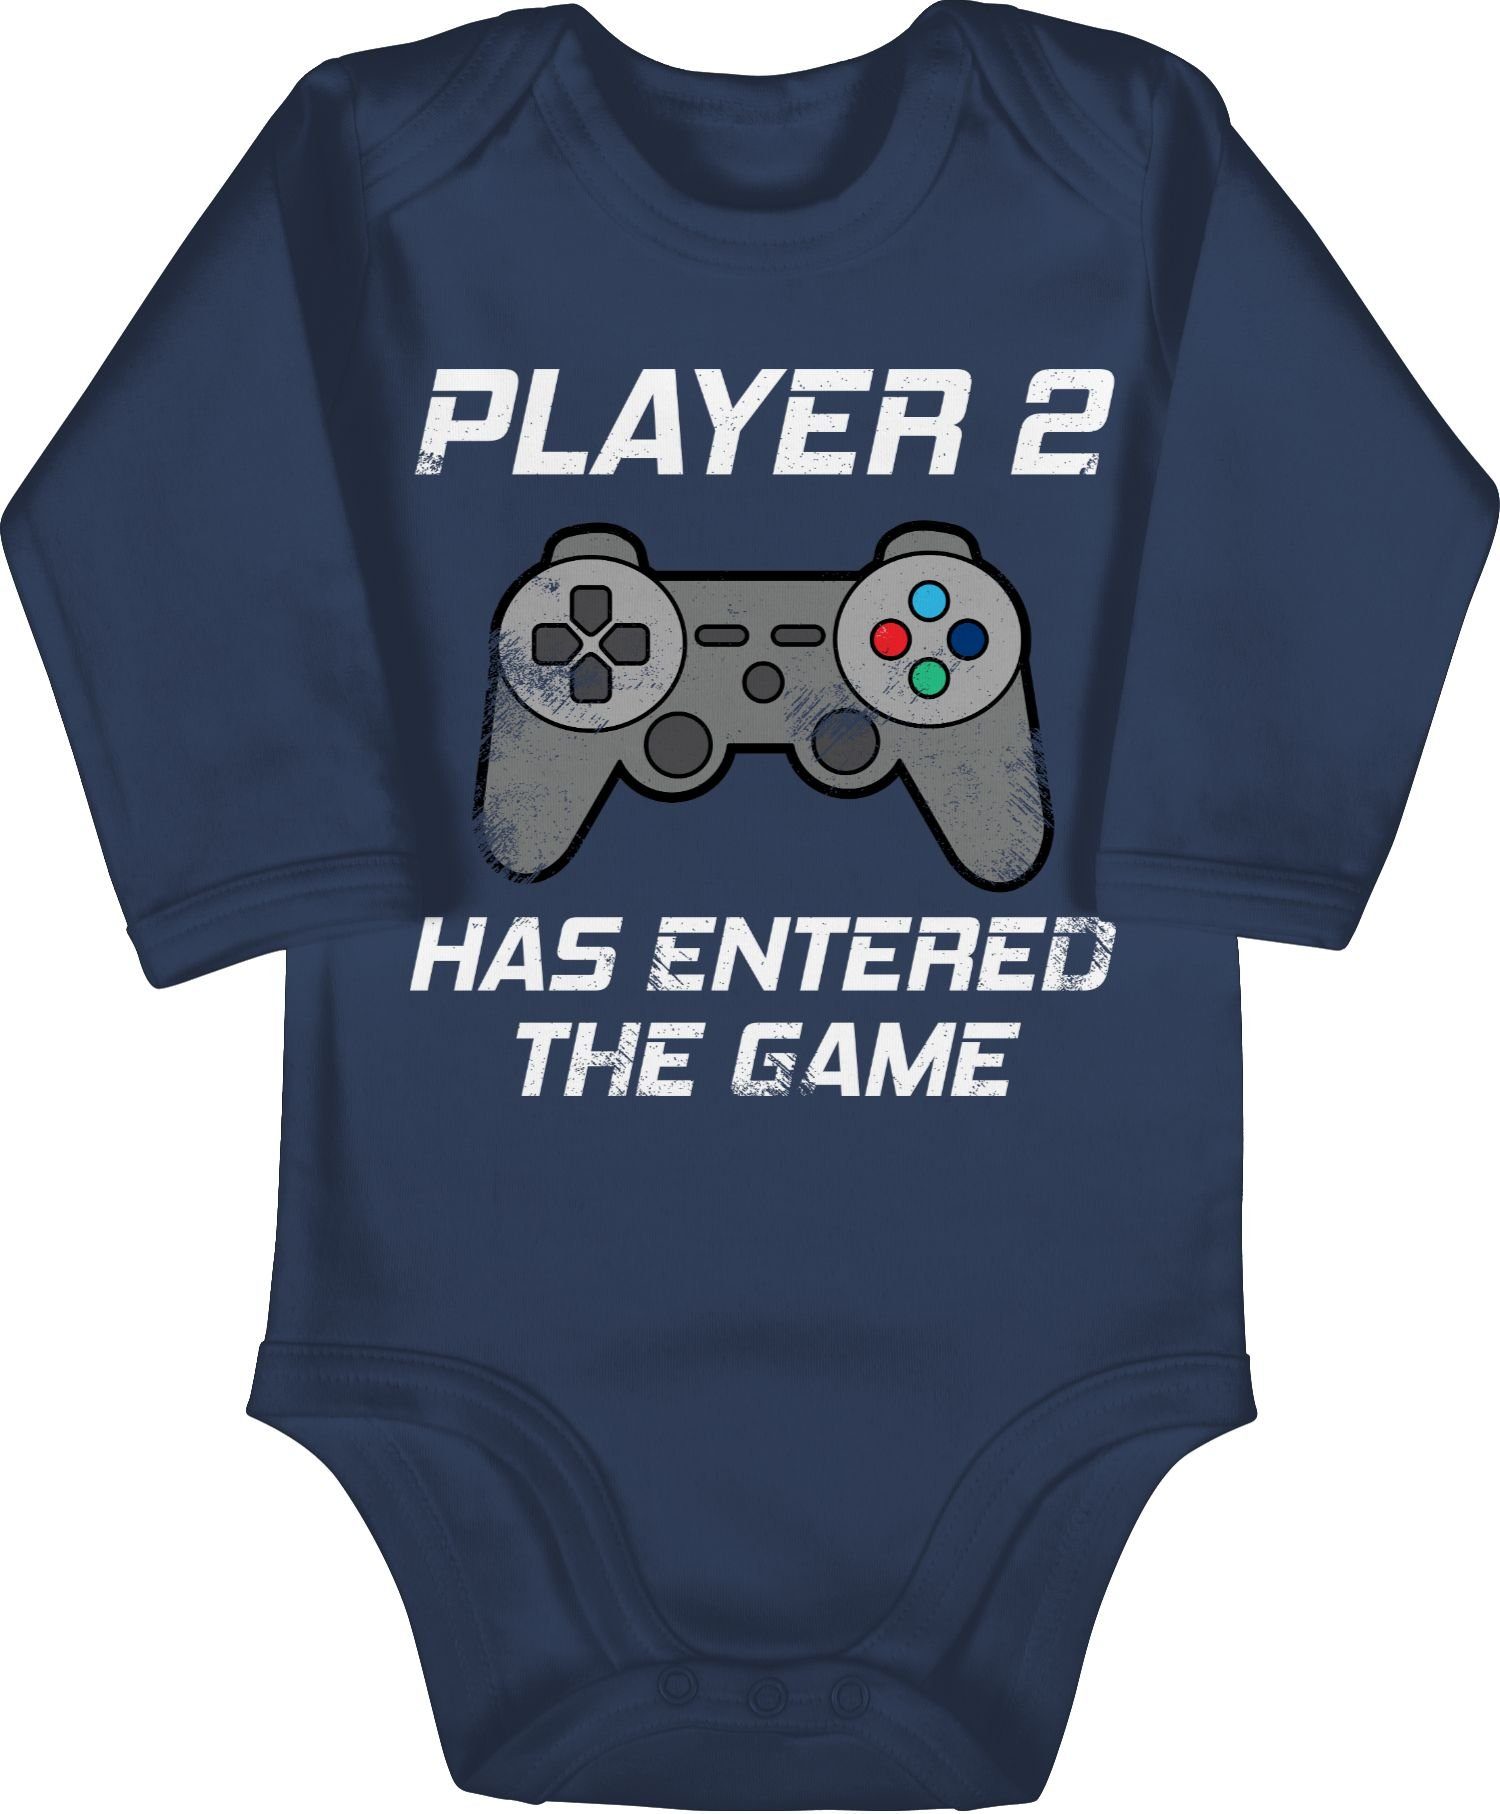 Shirtracer Shirtbody Player 2 has entered the game Controller grau Partner-Look Familie Baby 2 Navy Blau